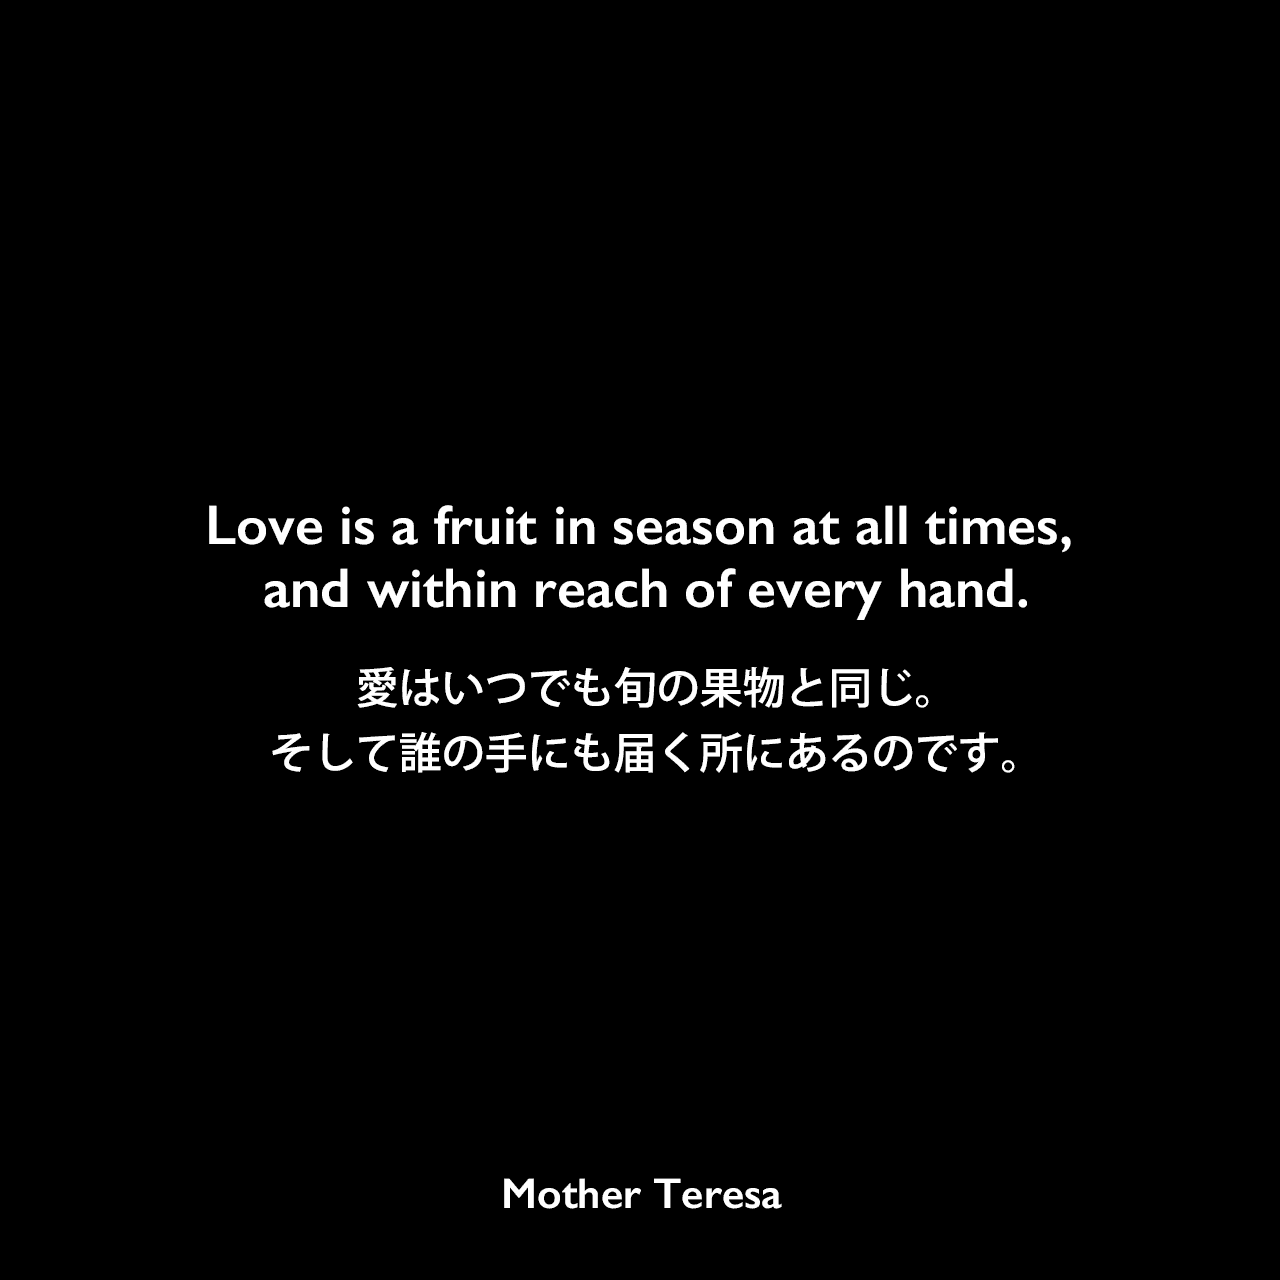 Love is a fruit in season at all times, and within reach of every hand.愛はいつでも旬の果物と同じ。そして誰の手にも届く所にあるのです。- マザー・テレサの本「Love, a Fruit Always in Season」よりMother Teresa